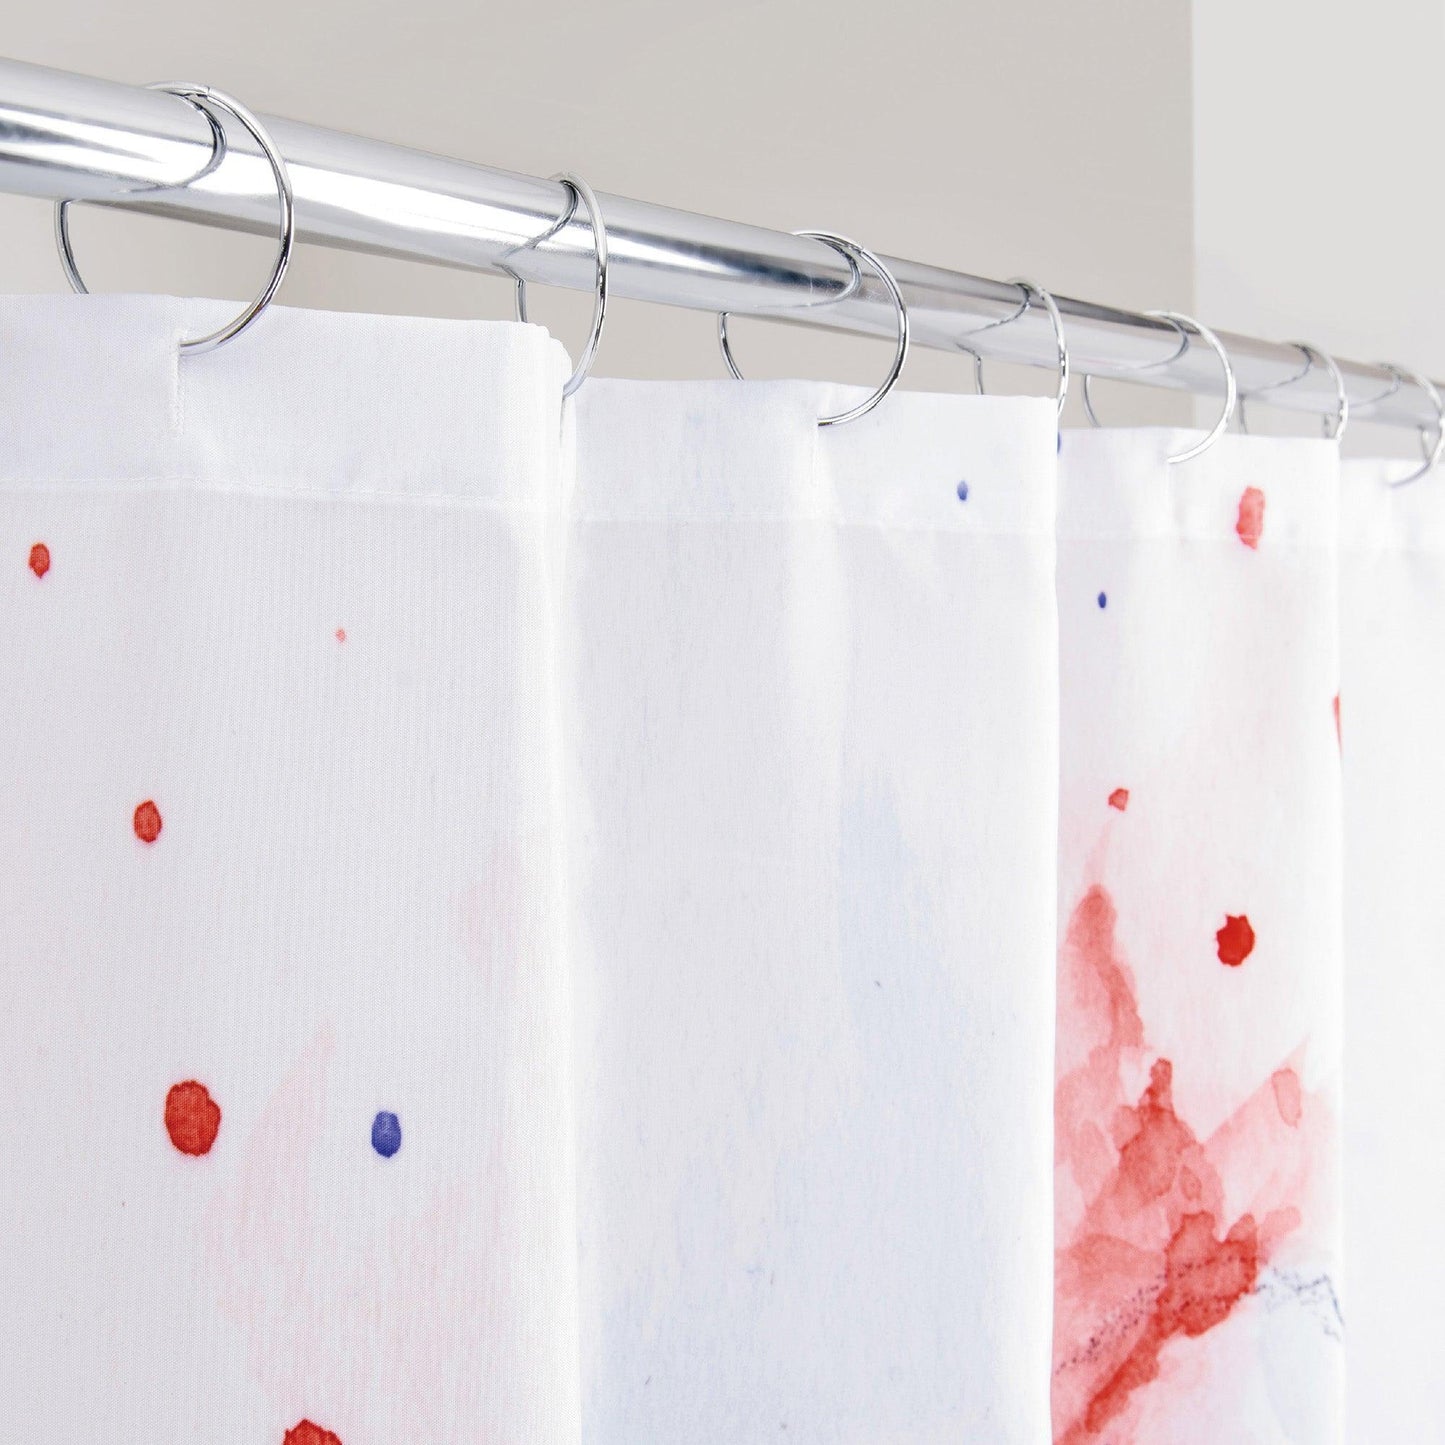 Water Pup Shower Curtain - Allure Home Creation